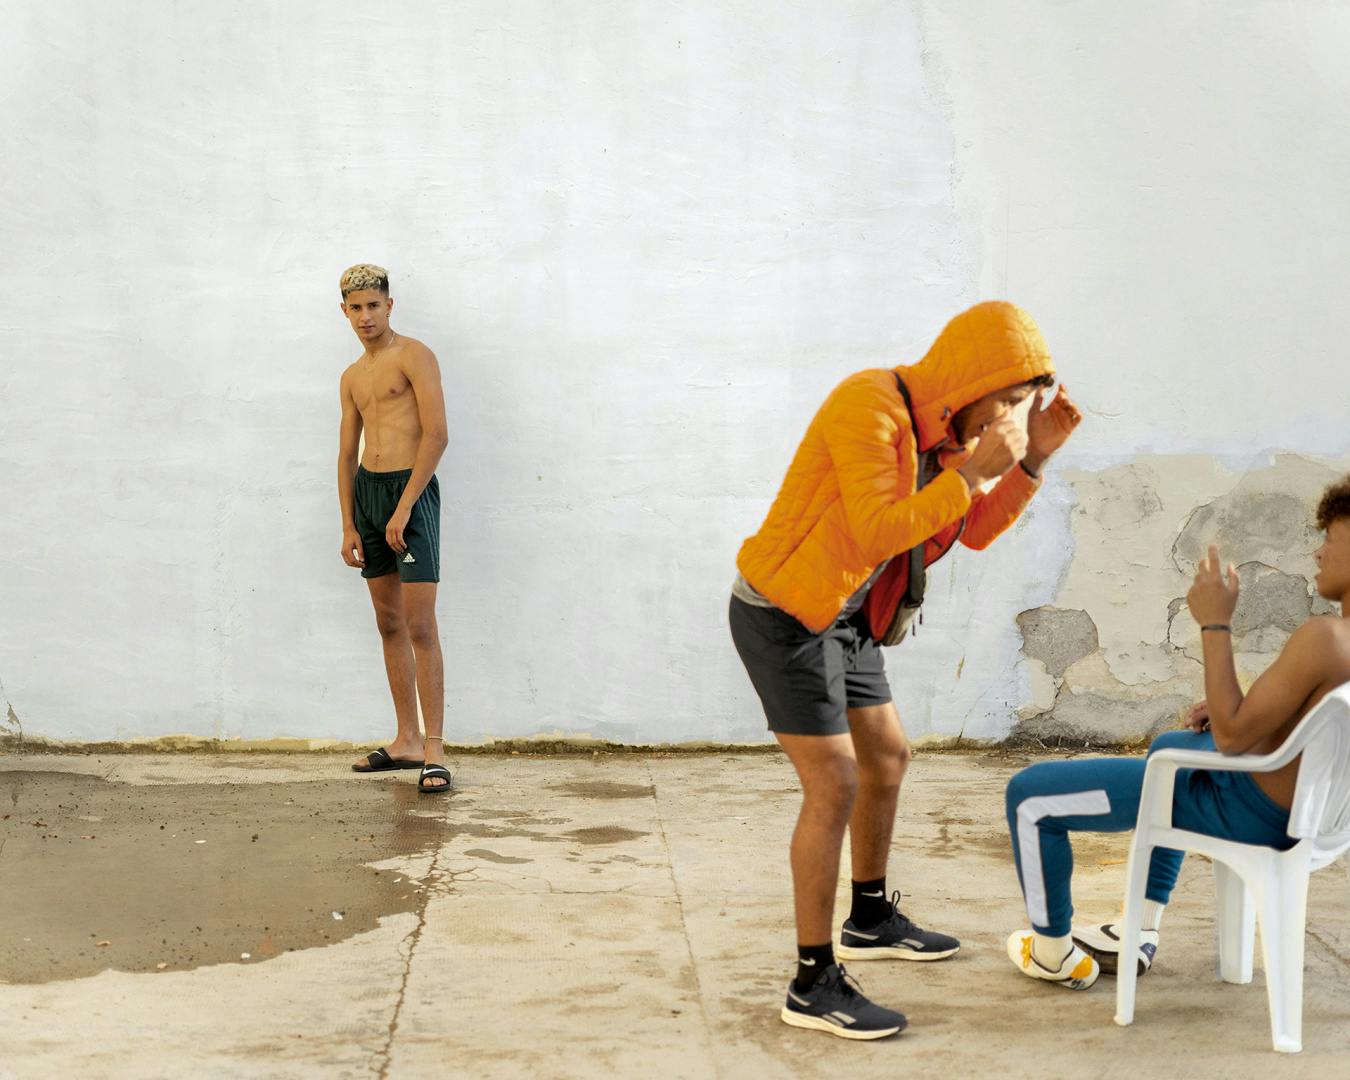 Photograph of a young person wearing an orange hooded jacket and dark shorts holding their hands up to their face and leaning over another young person wearing blue sportswear sat down in a white plastic chair. A third person wearing black shorts and pool sliders is stood against a white wall watching on, taken from Dialect by Felipe Romero Beltran